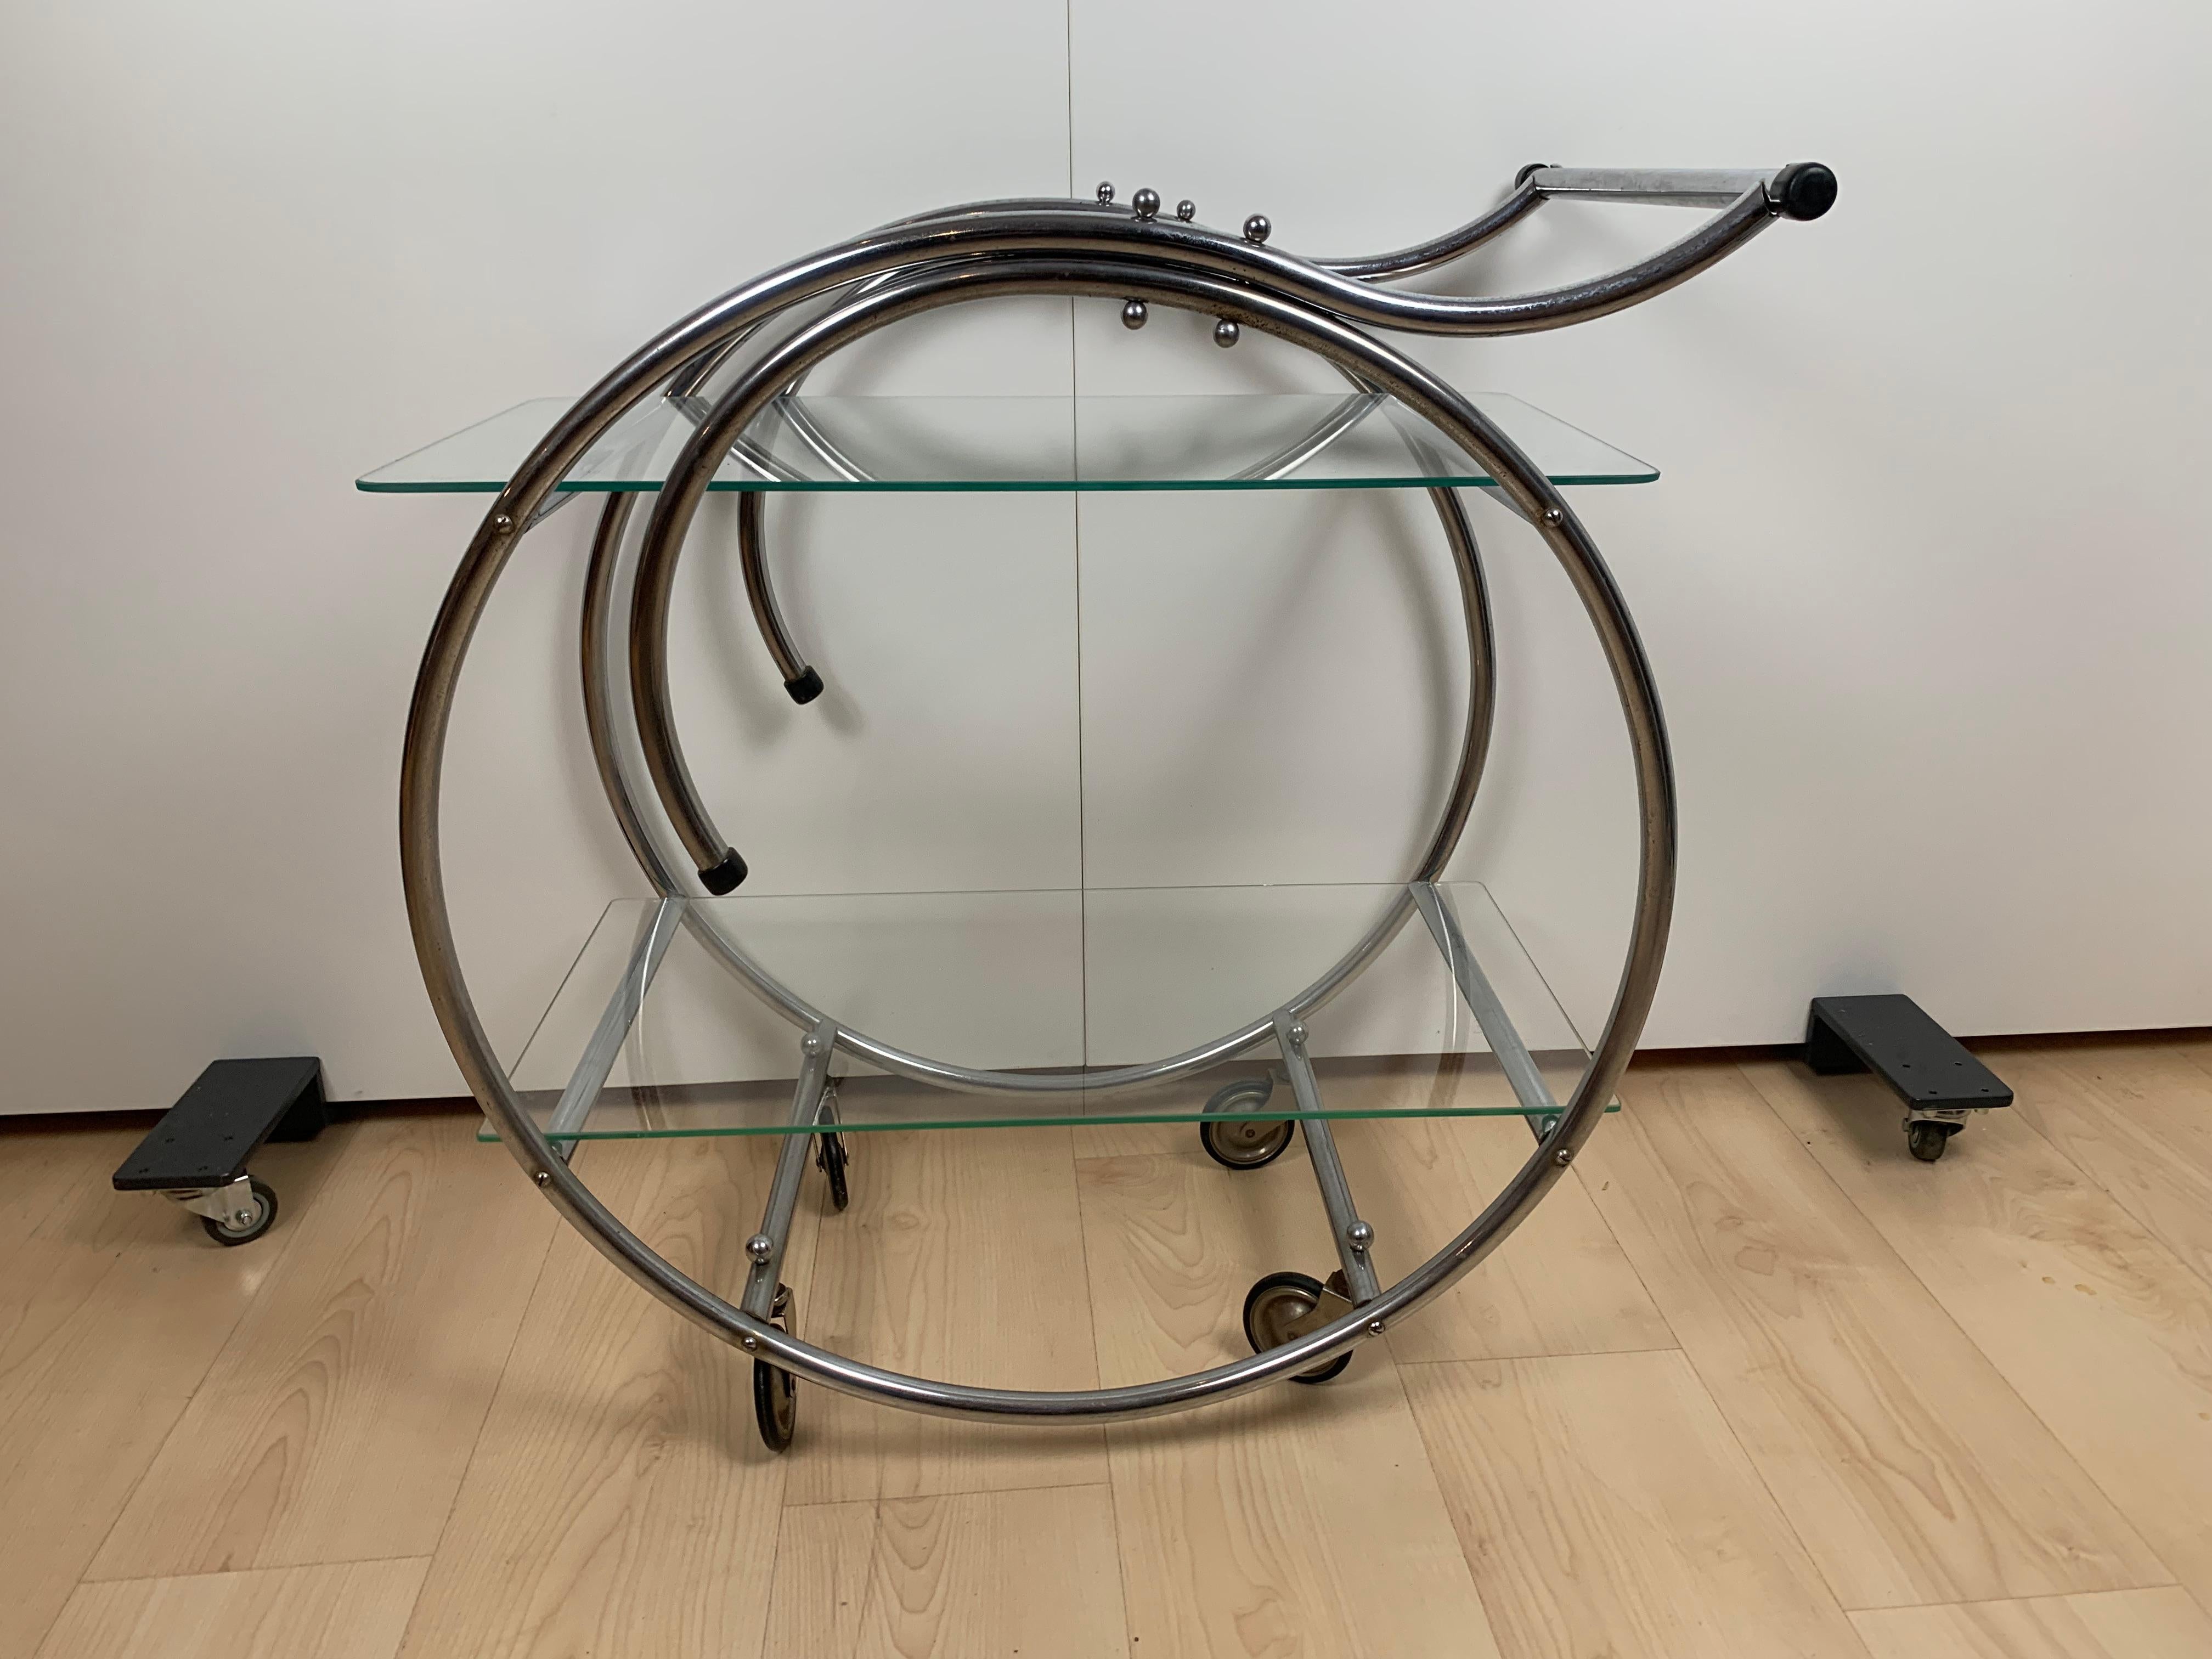 Chromed, bent steel tube. Mobile on 4 old rubber wheels. 2 glass plates.

Dimensions: H 73 cm x L 70 cm x W 40 cm.